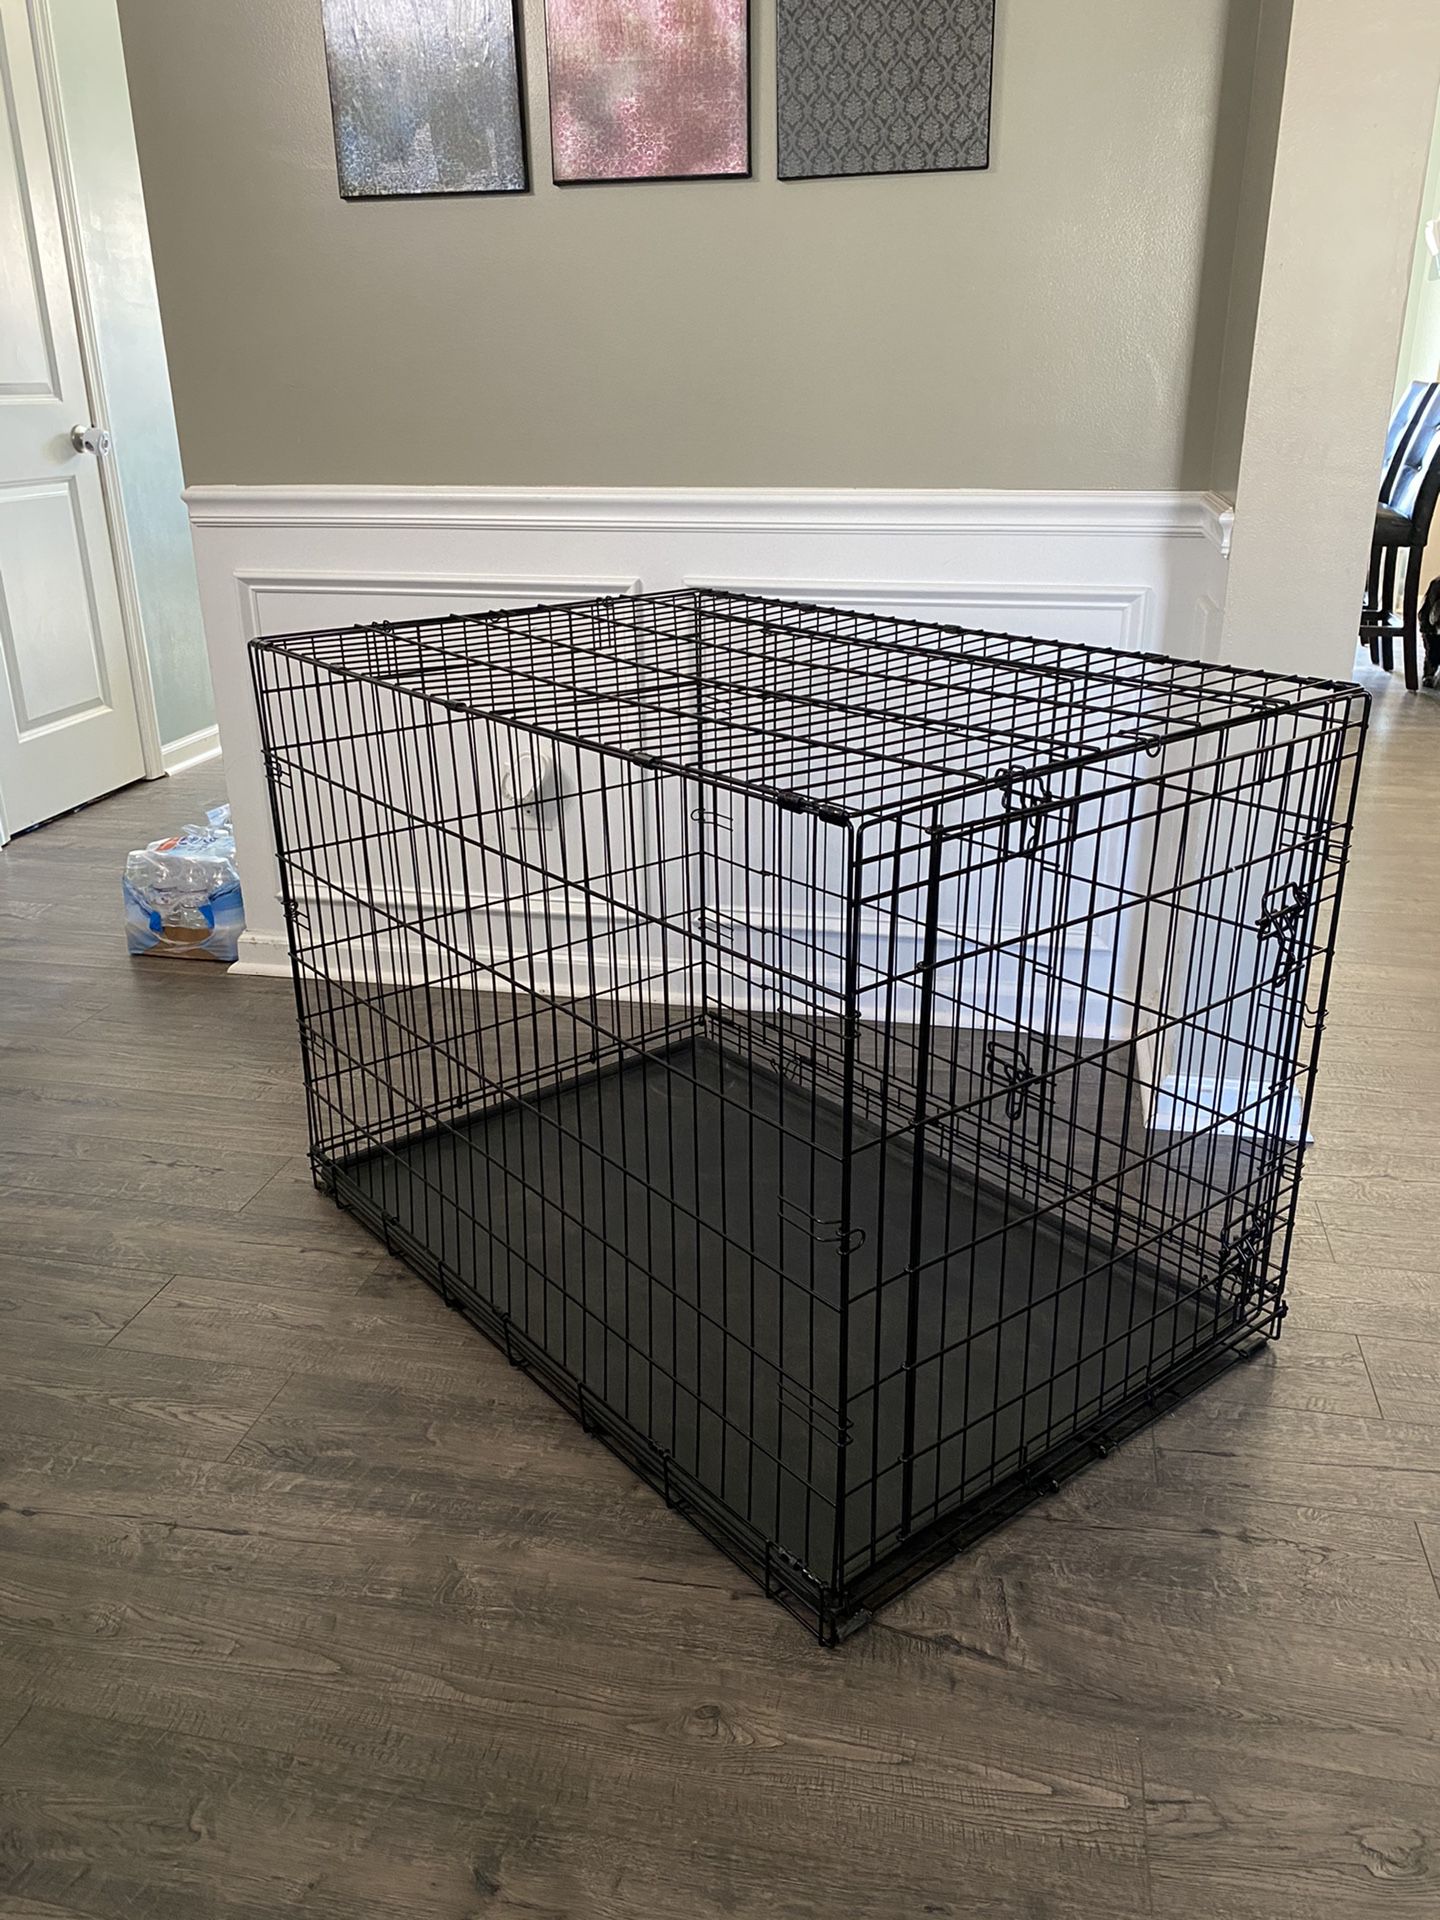  Dog Crate With Divider Two Doors And Pull Out Tray! 42x28x30.5